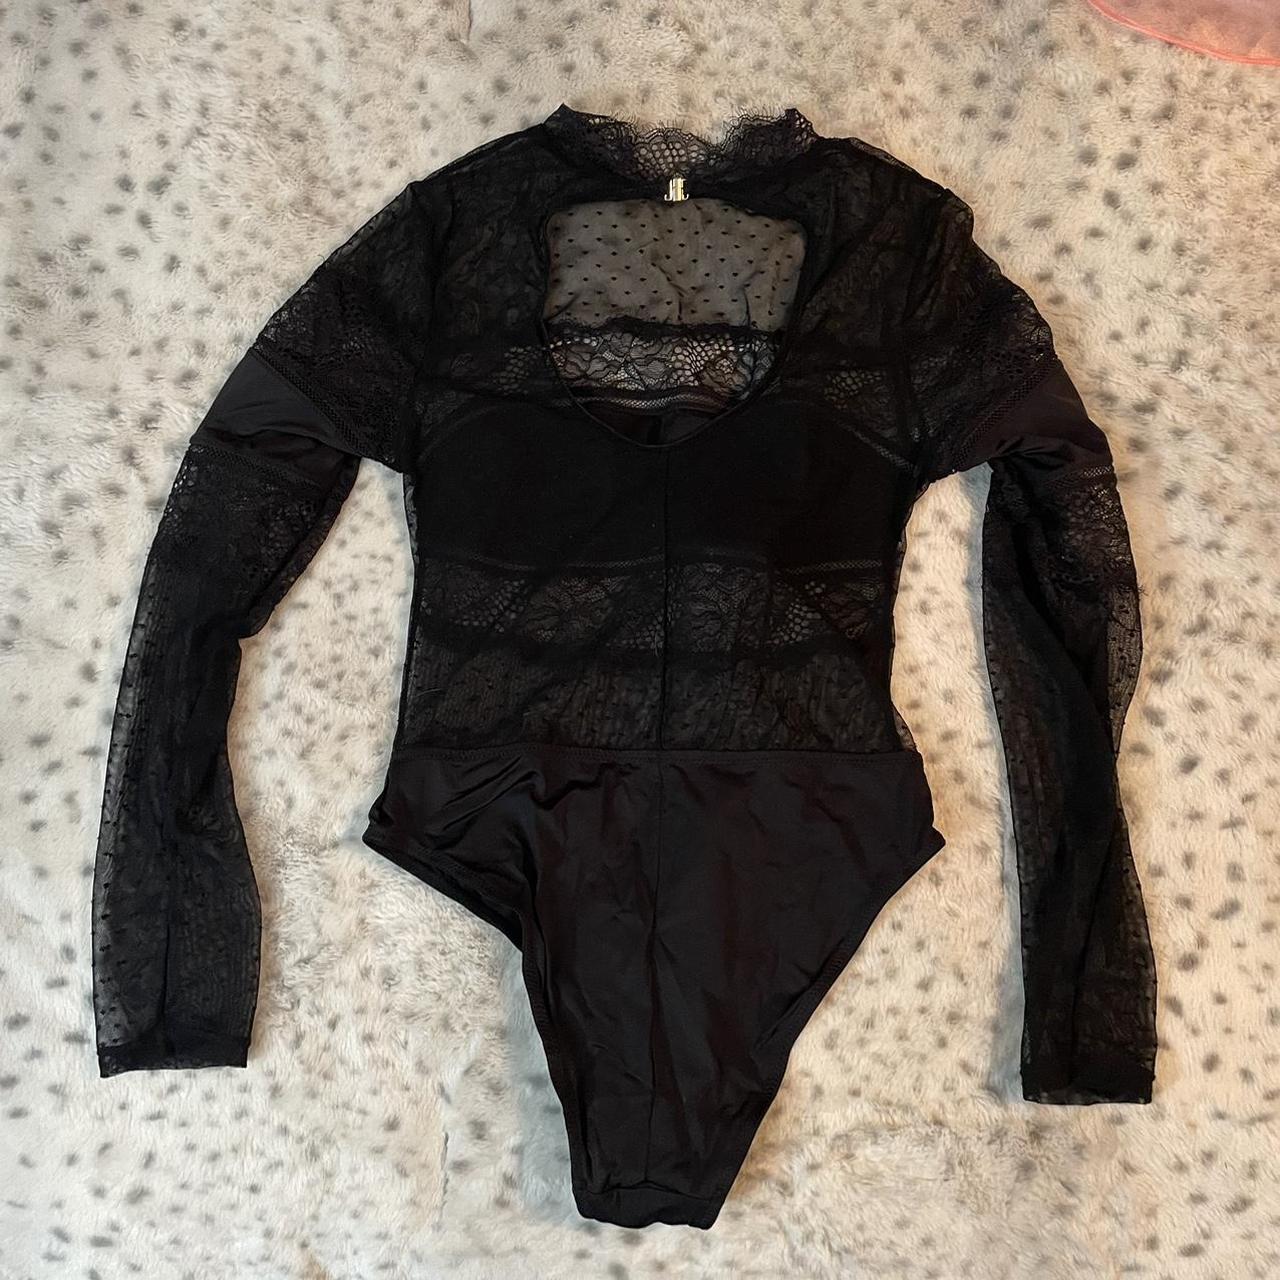 Thistle & spire black lace body suit small new - Depop